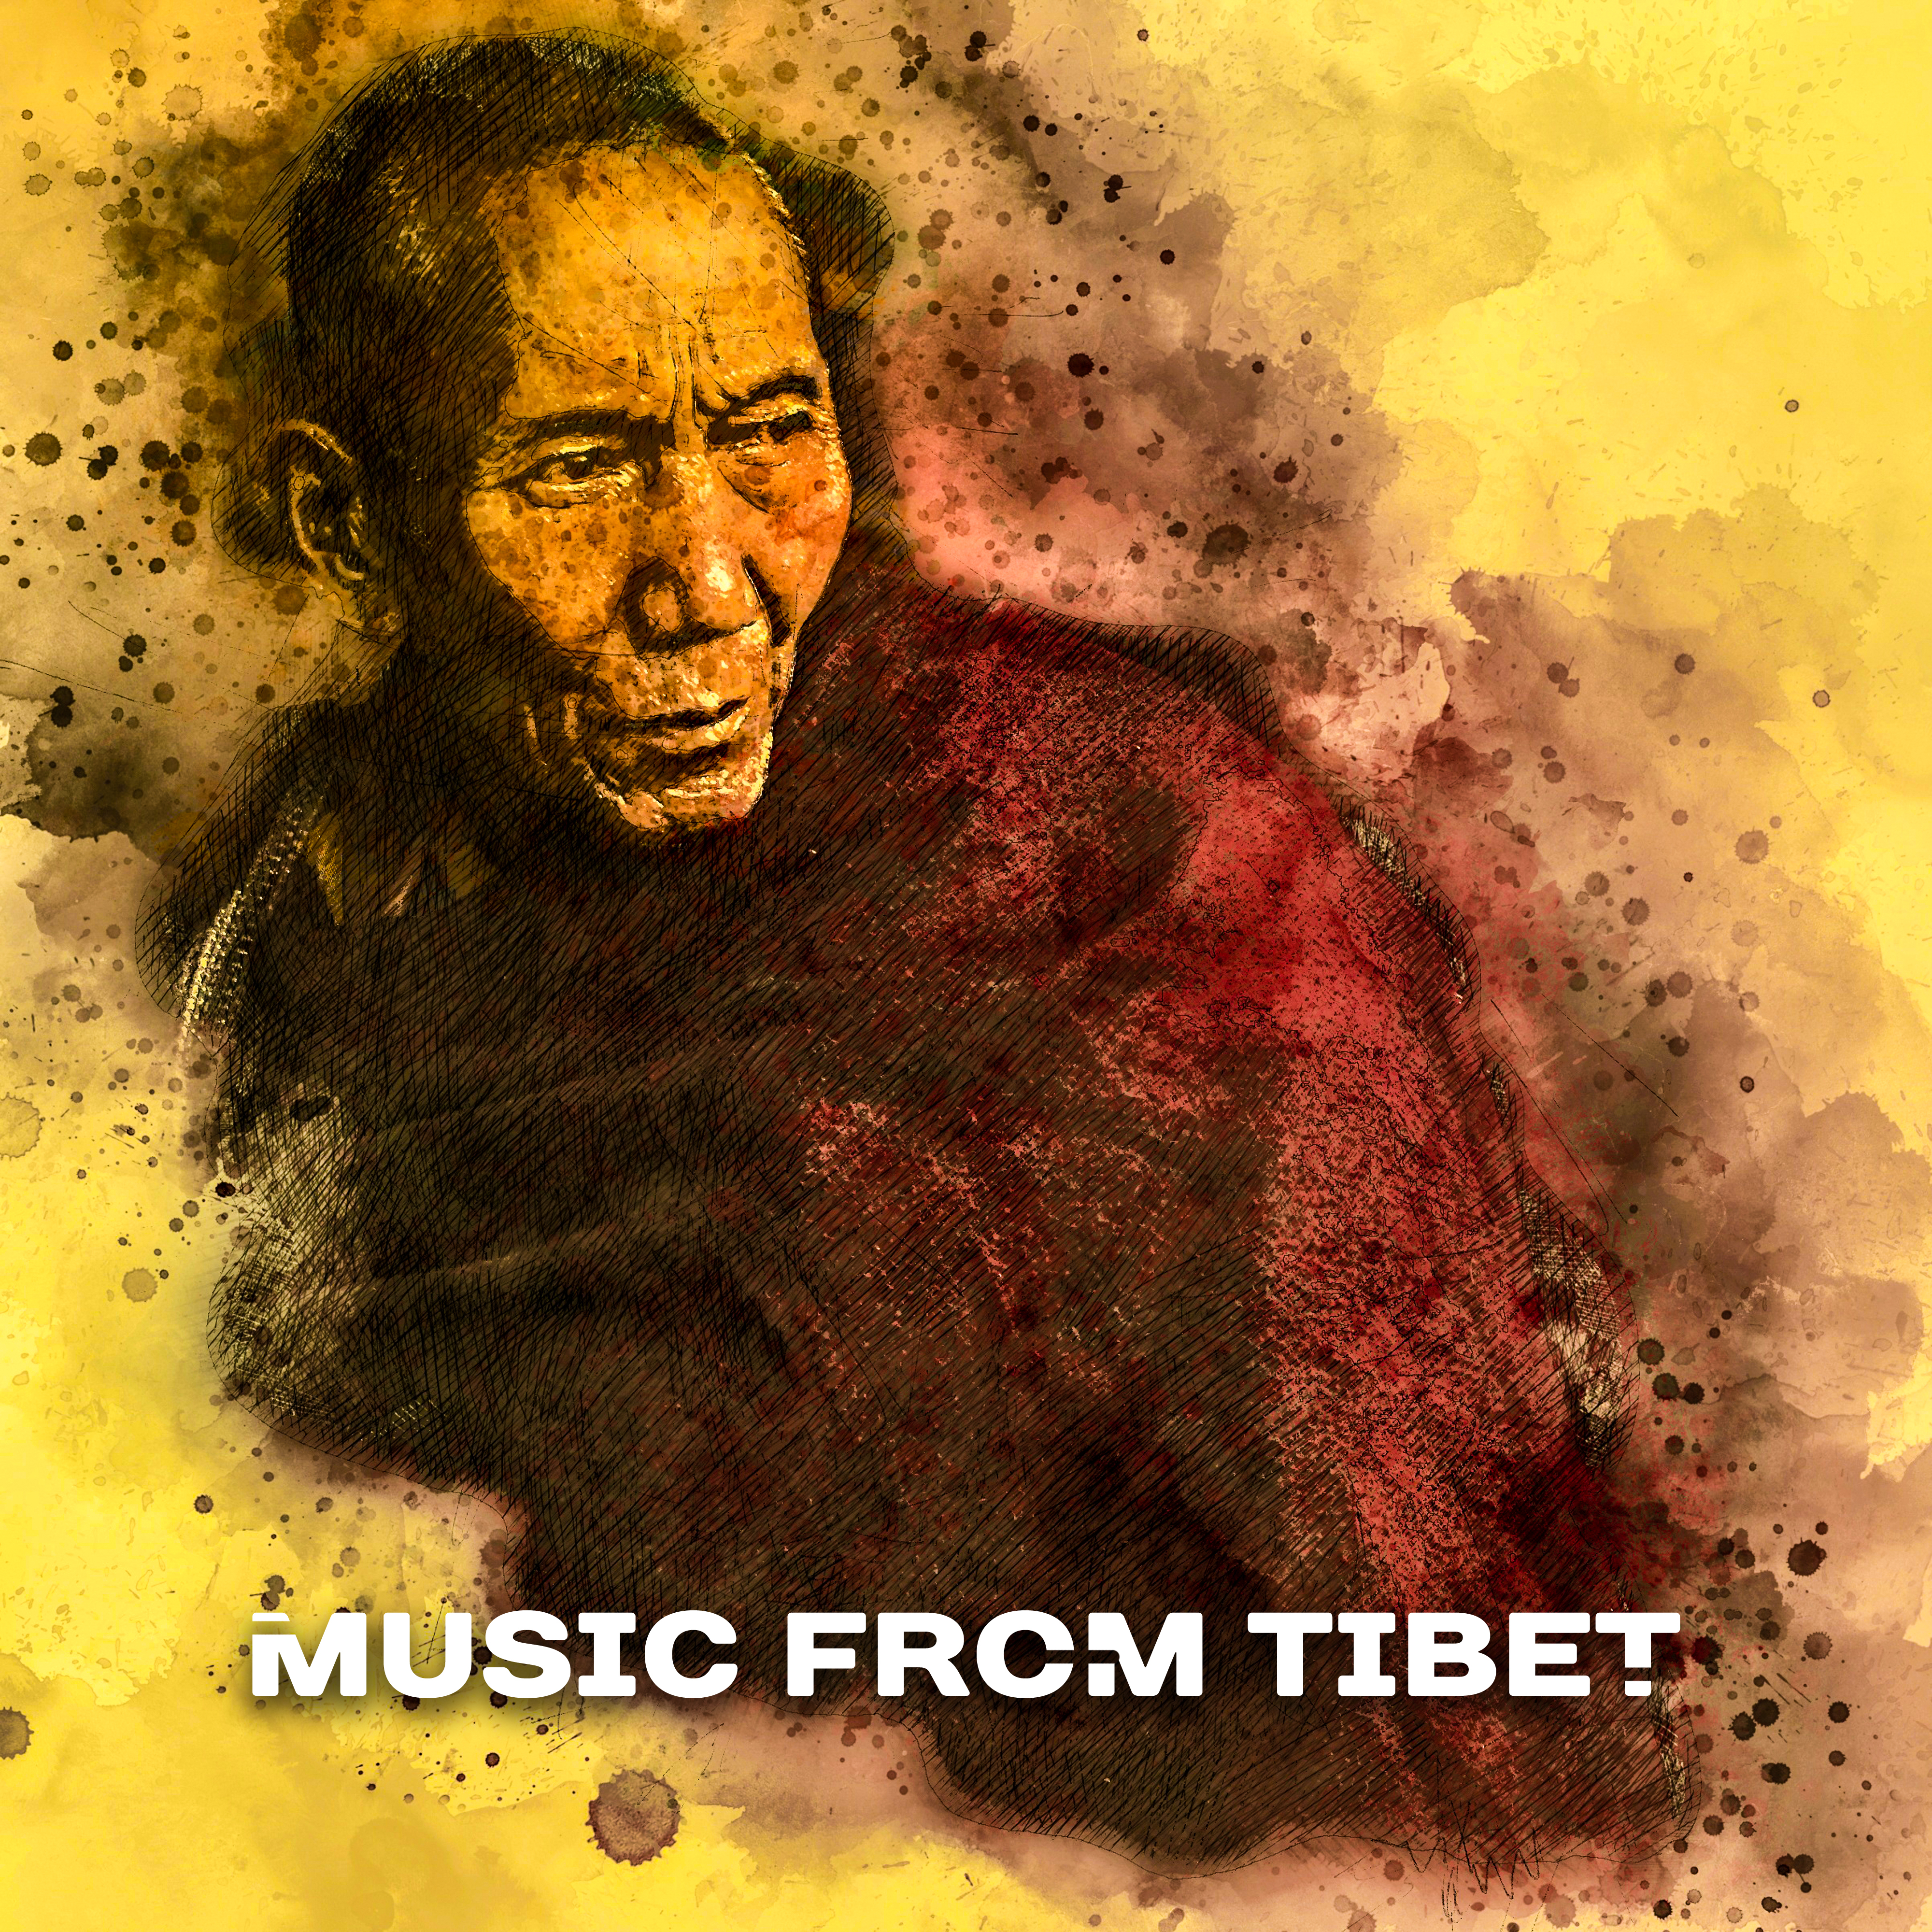 Music from Tibet  Peaceful Sounds for Meditation, Yoga, Relaxation, Chakra Balancing, Training Yoga, Soft Mindfulness, Inner Zen